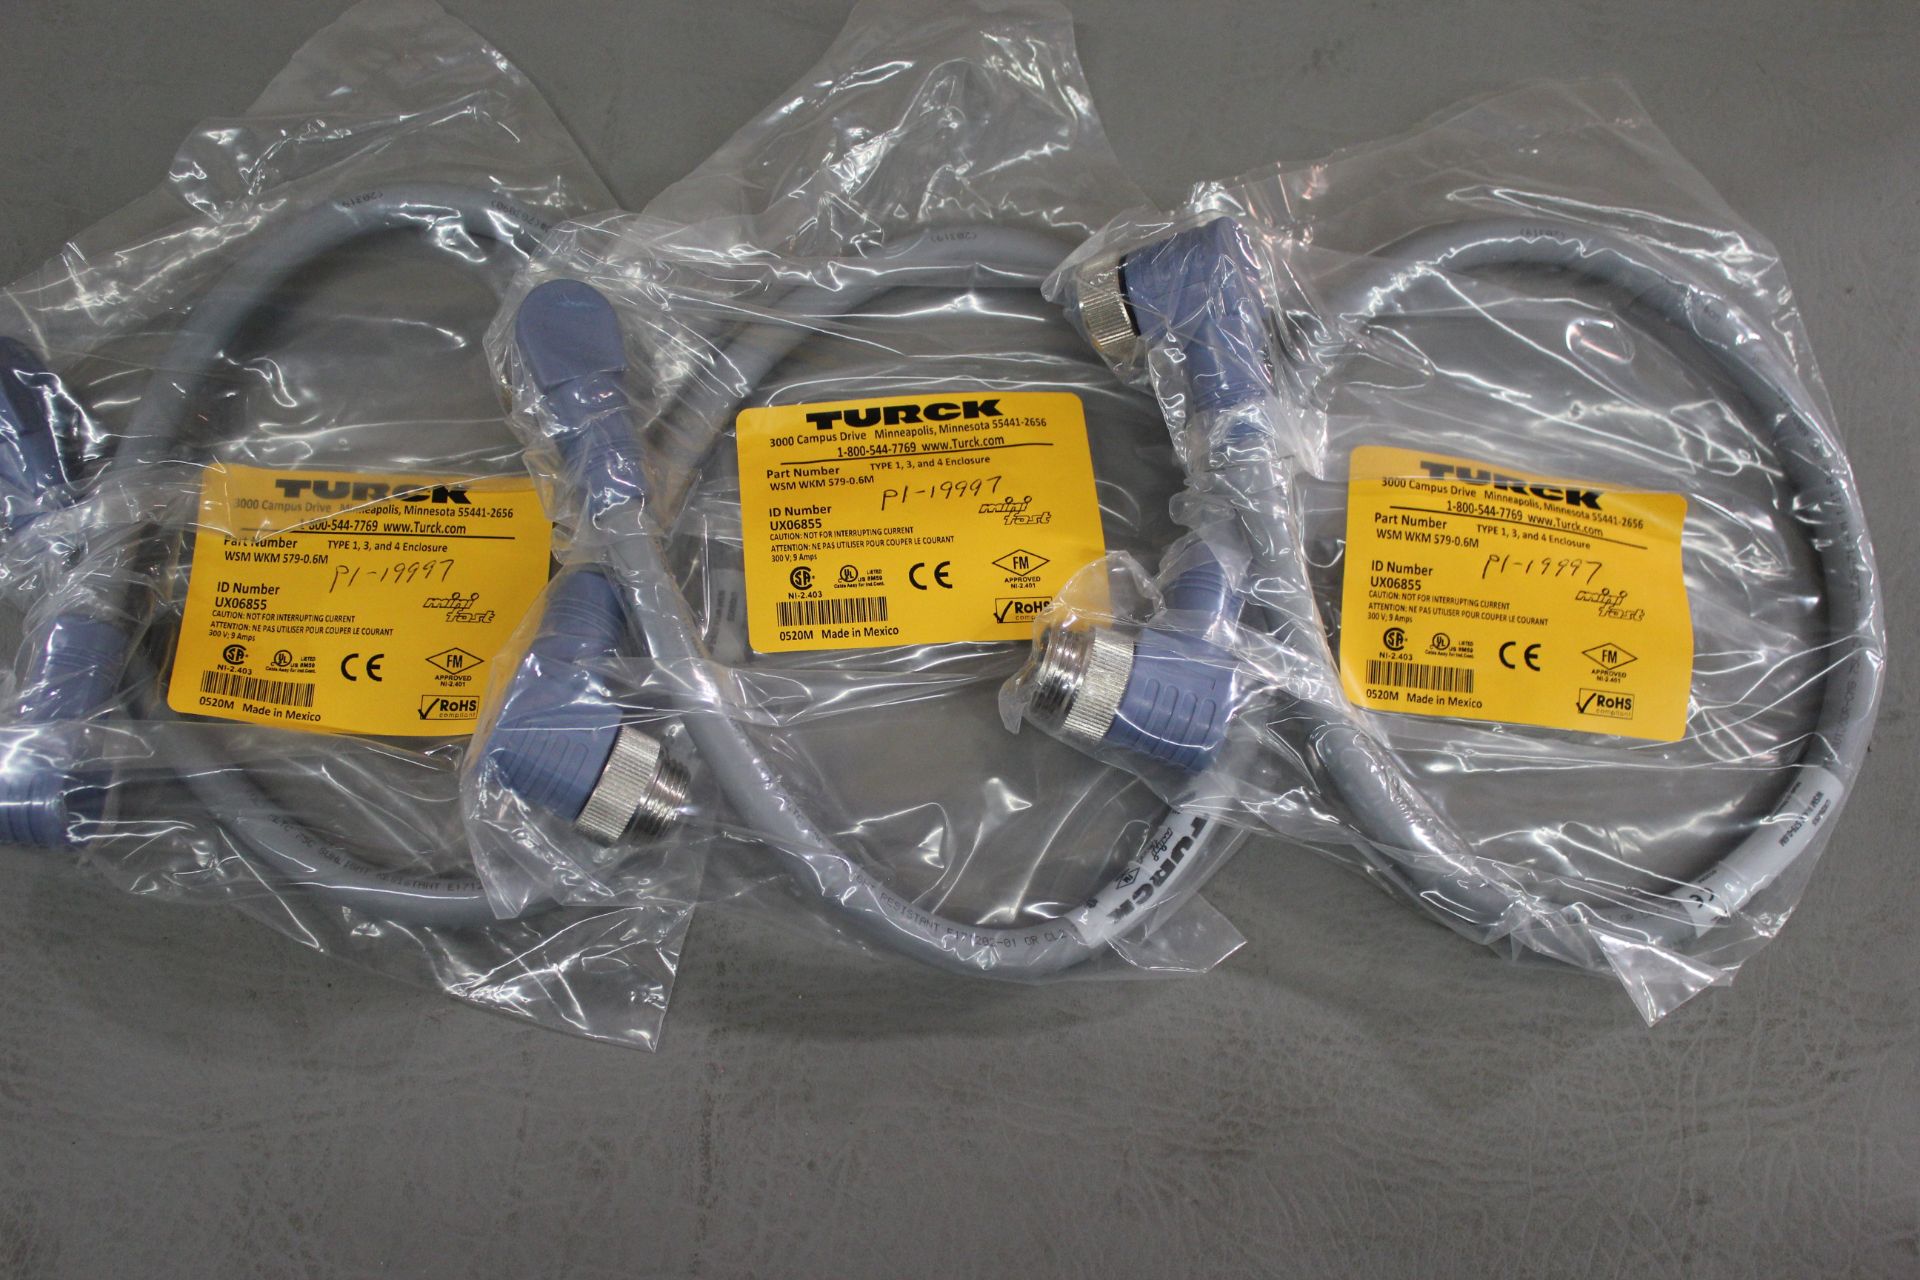 LOT OF NEW TURCK CABLES